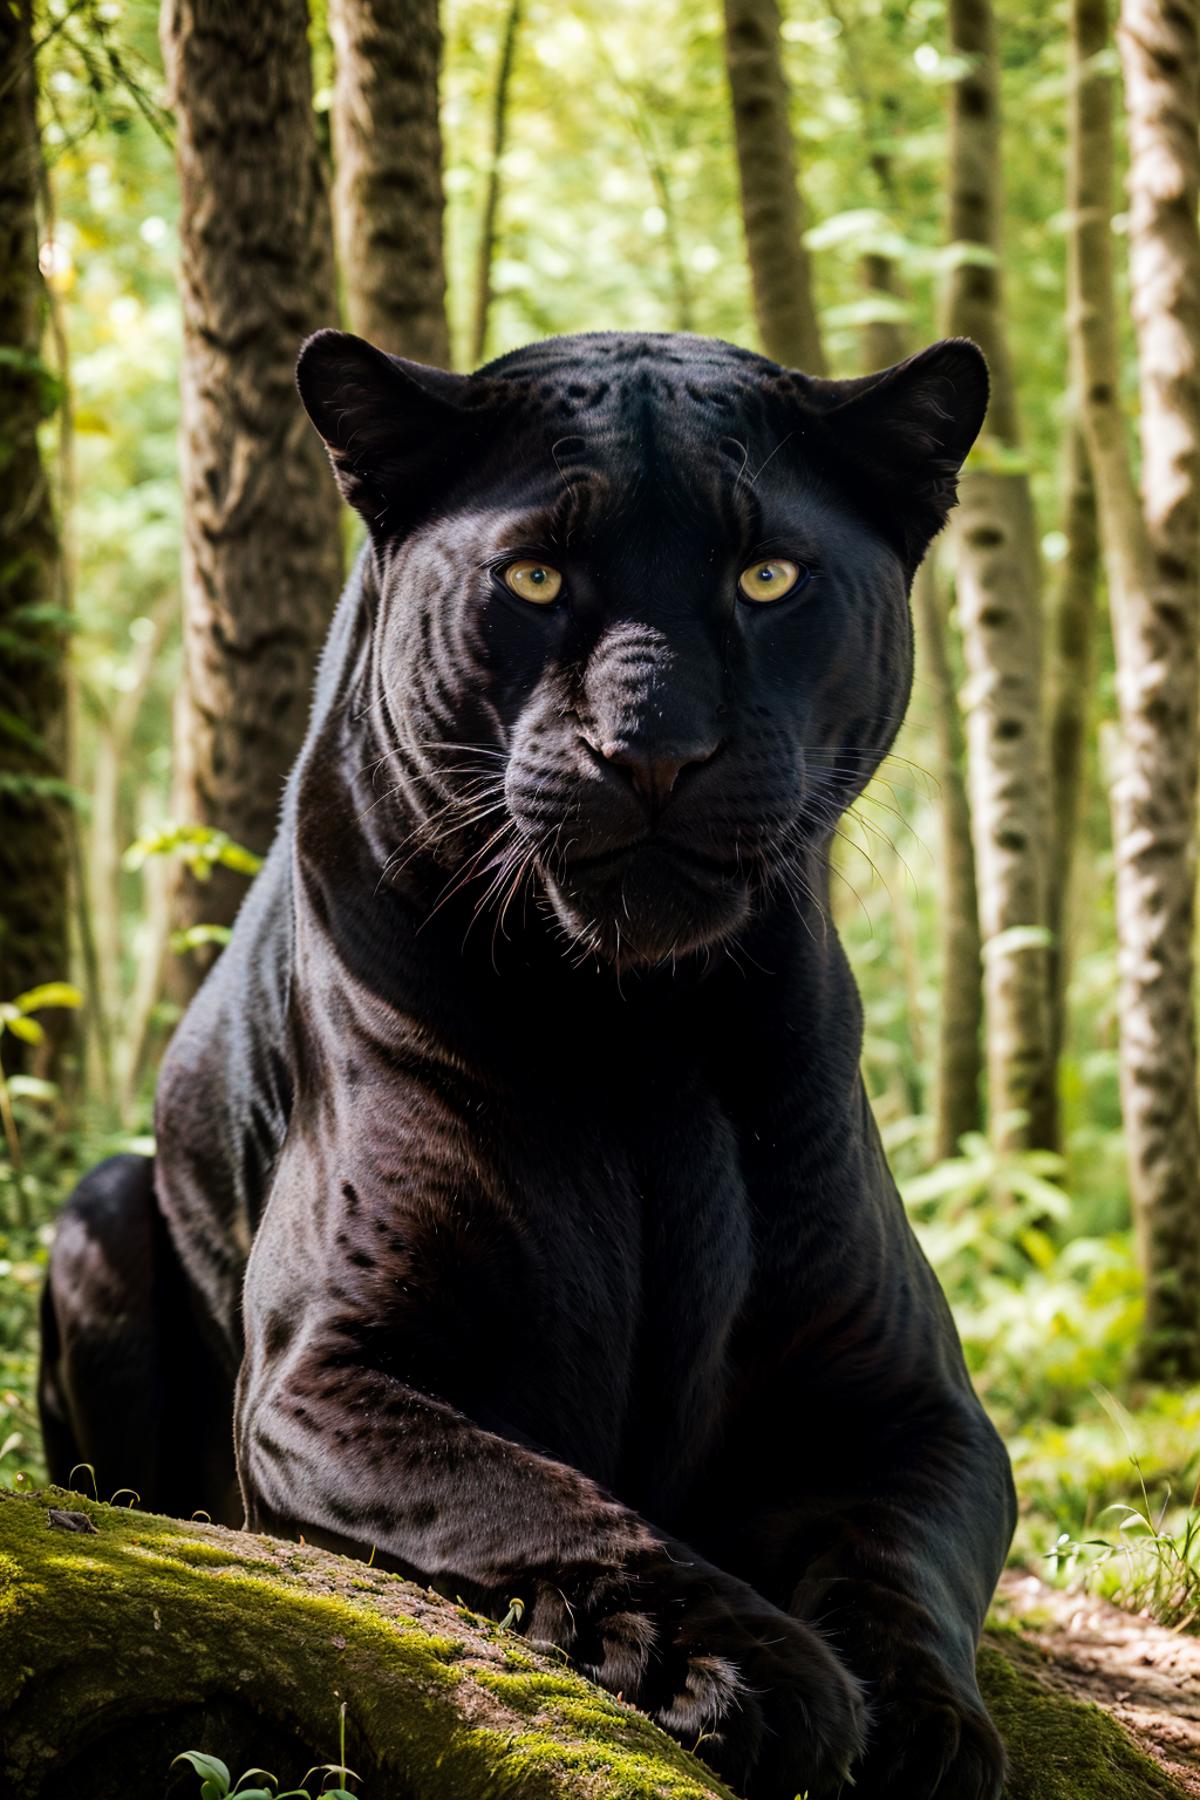 Actual Black Panther image by WaifuByMinion